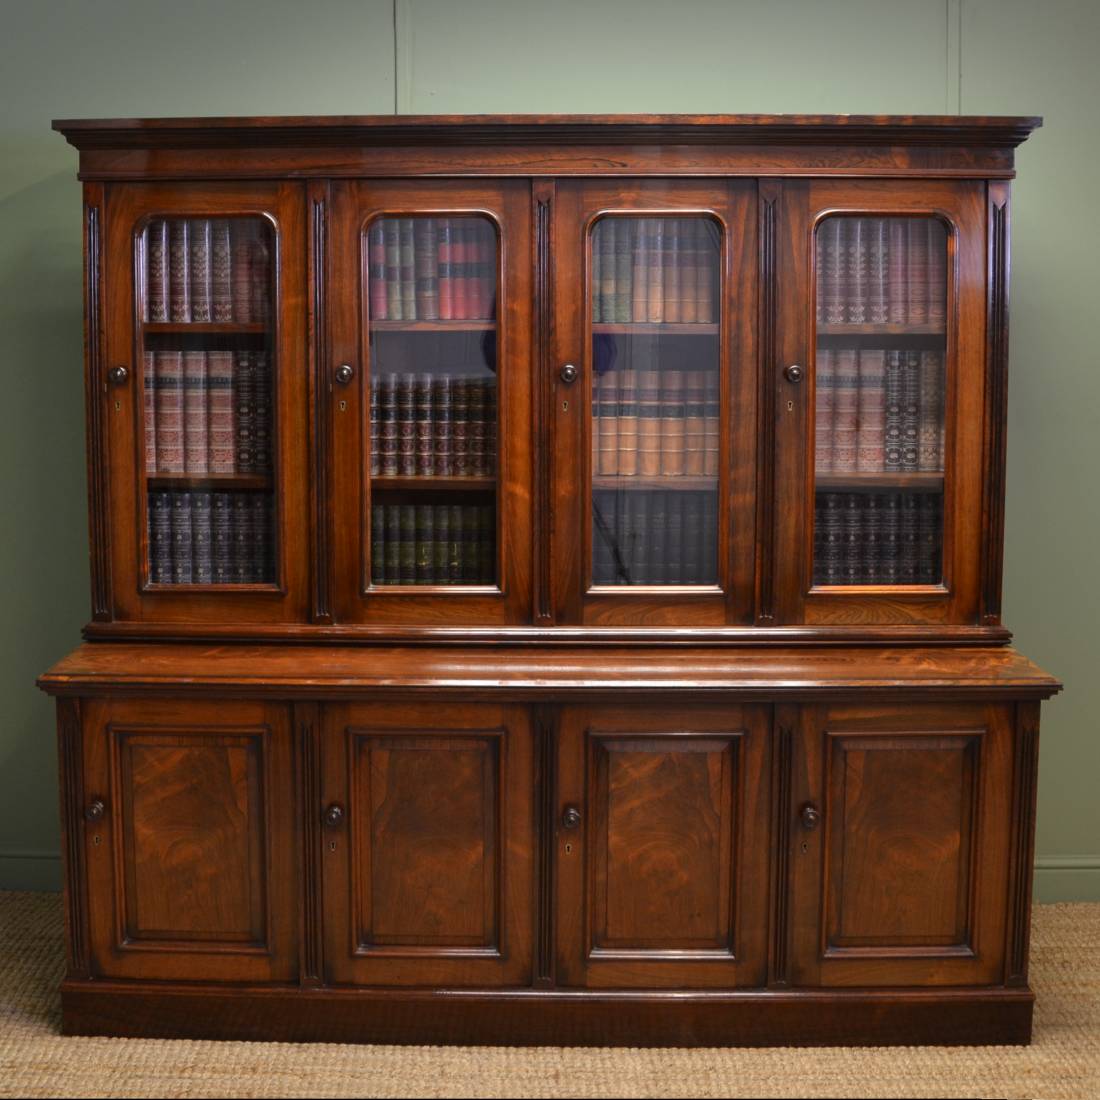 Spectacular Figured Rosewood Victorian Antique Library Bookcase Of Small Proportions - H Ogden.